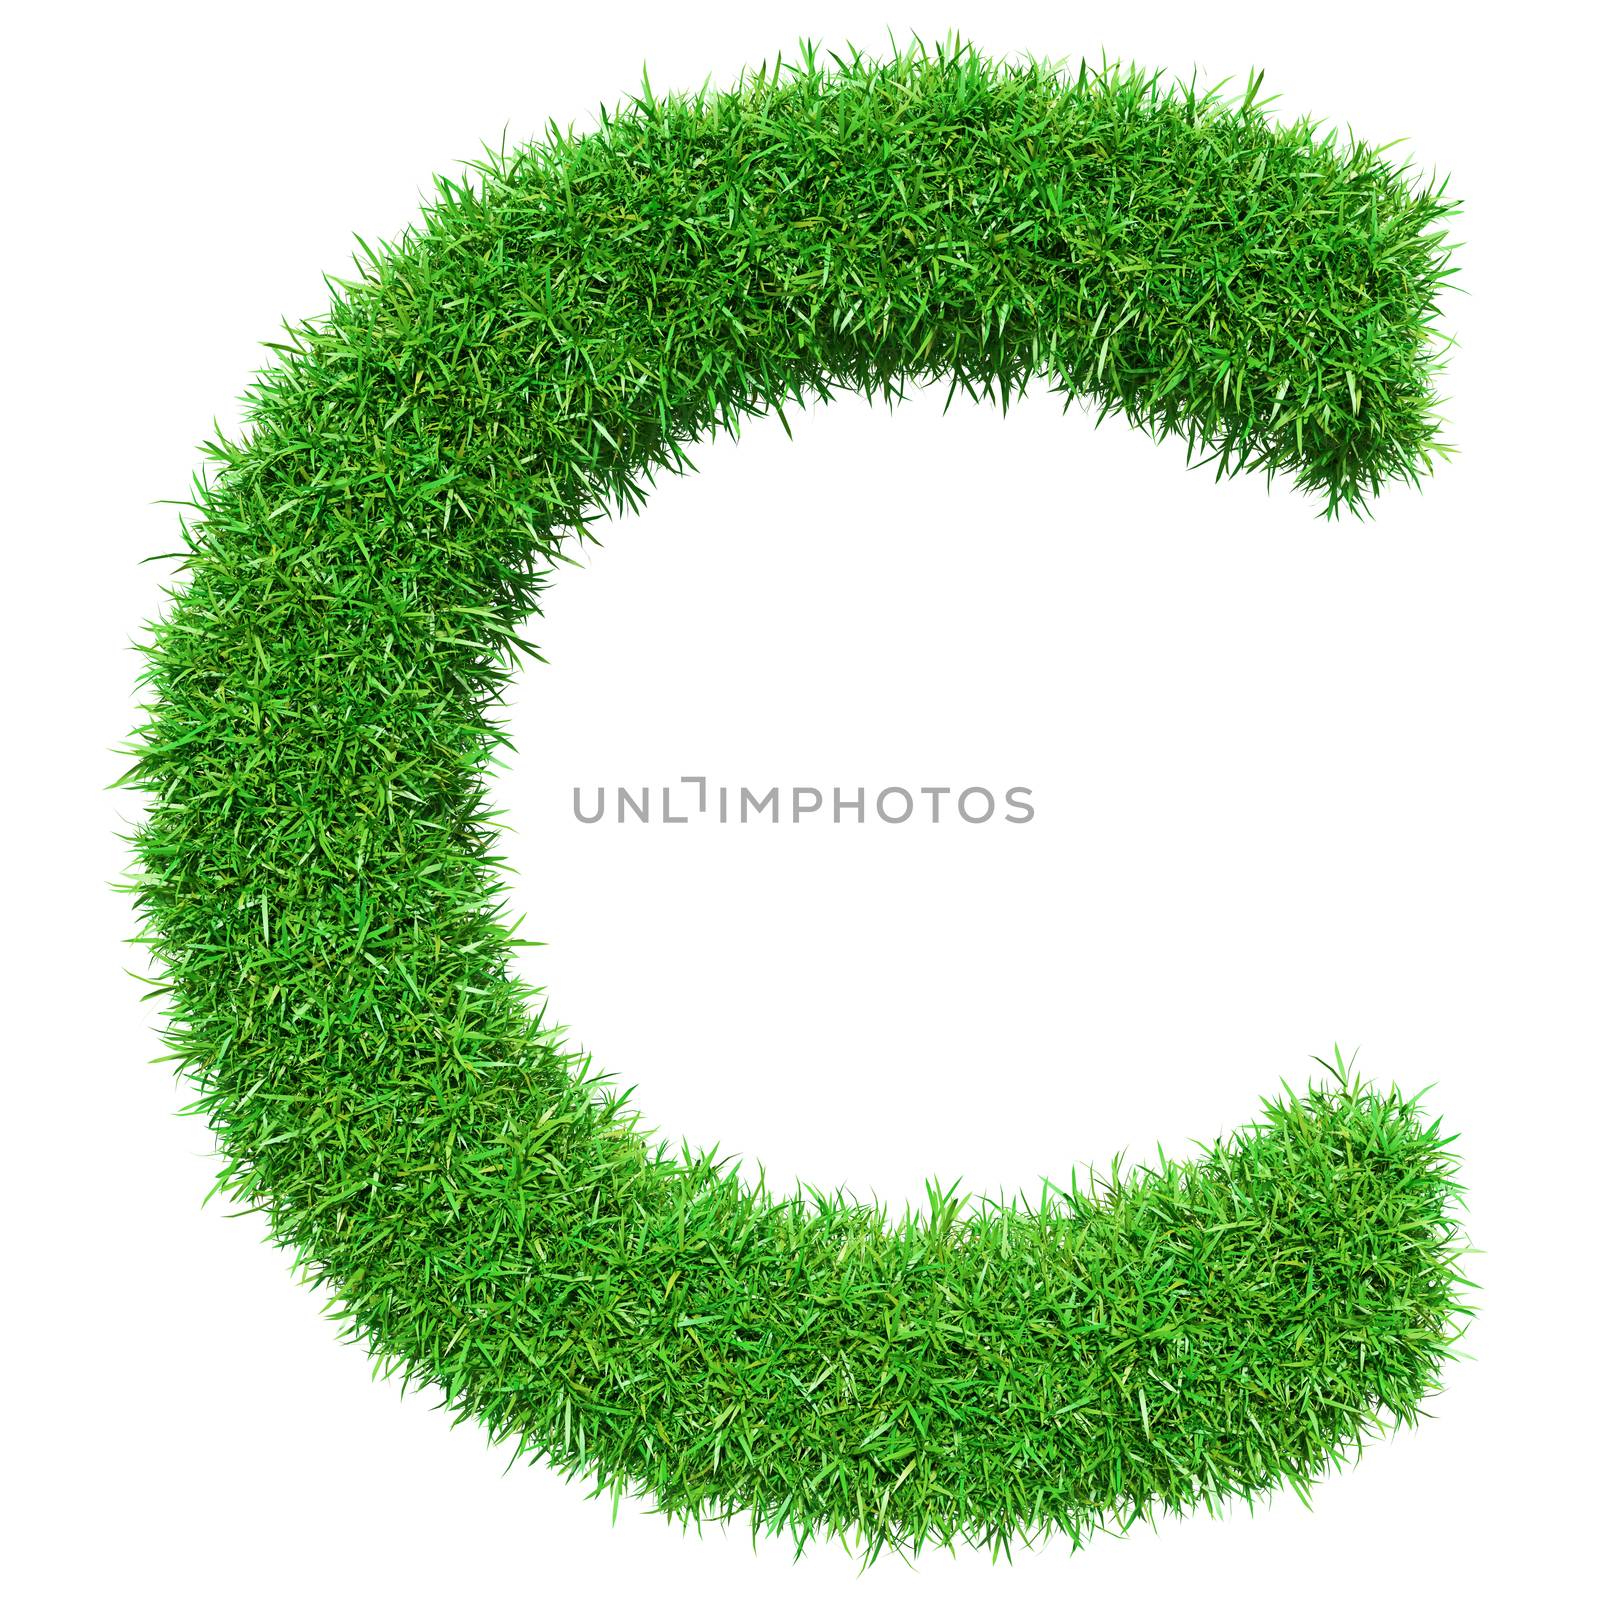 Green Grass Letter C. Isolated On White Background. Font For Your Design. 3D Illustration